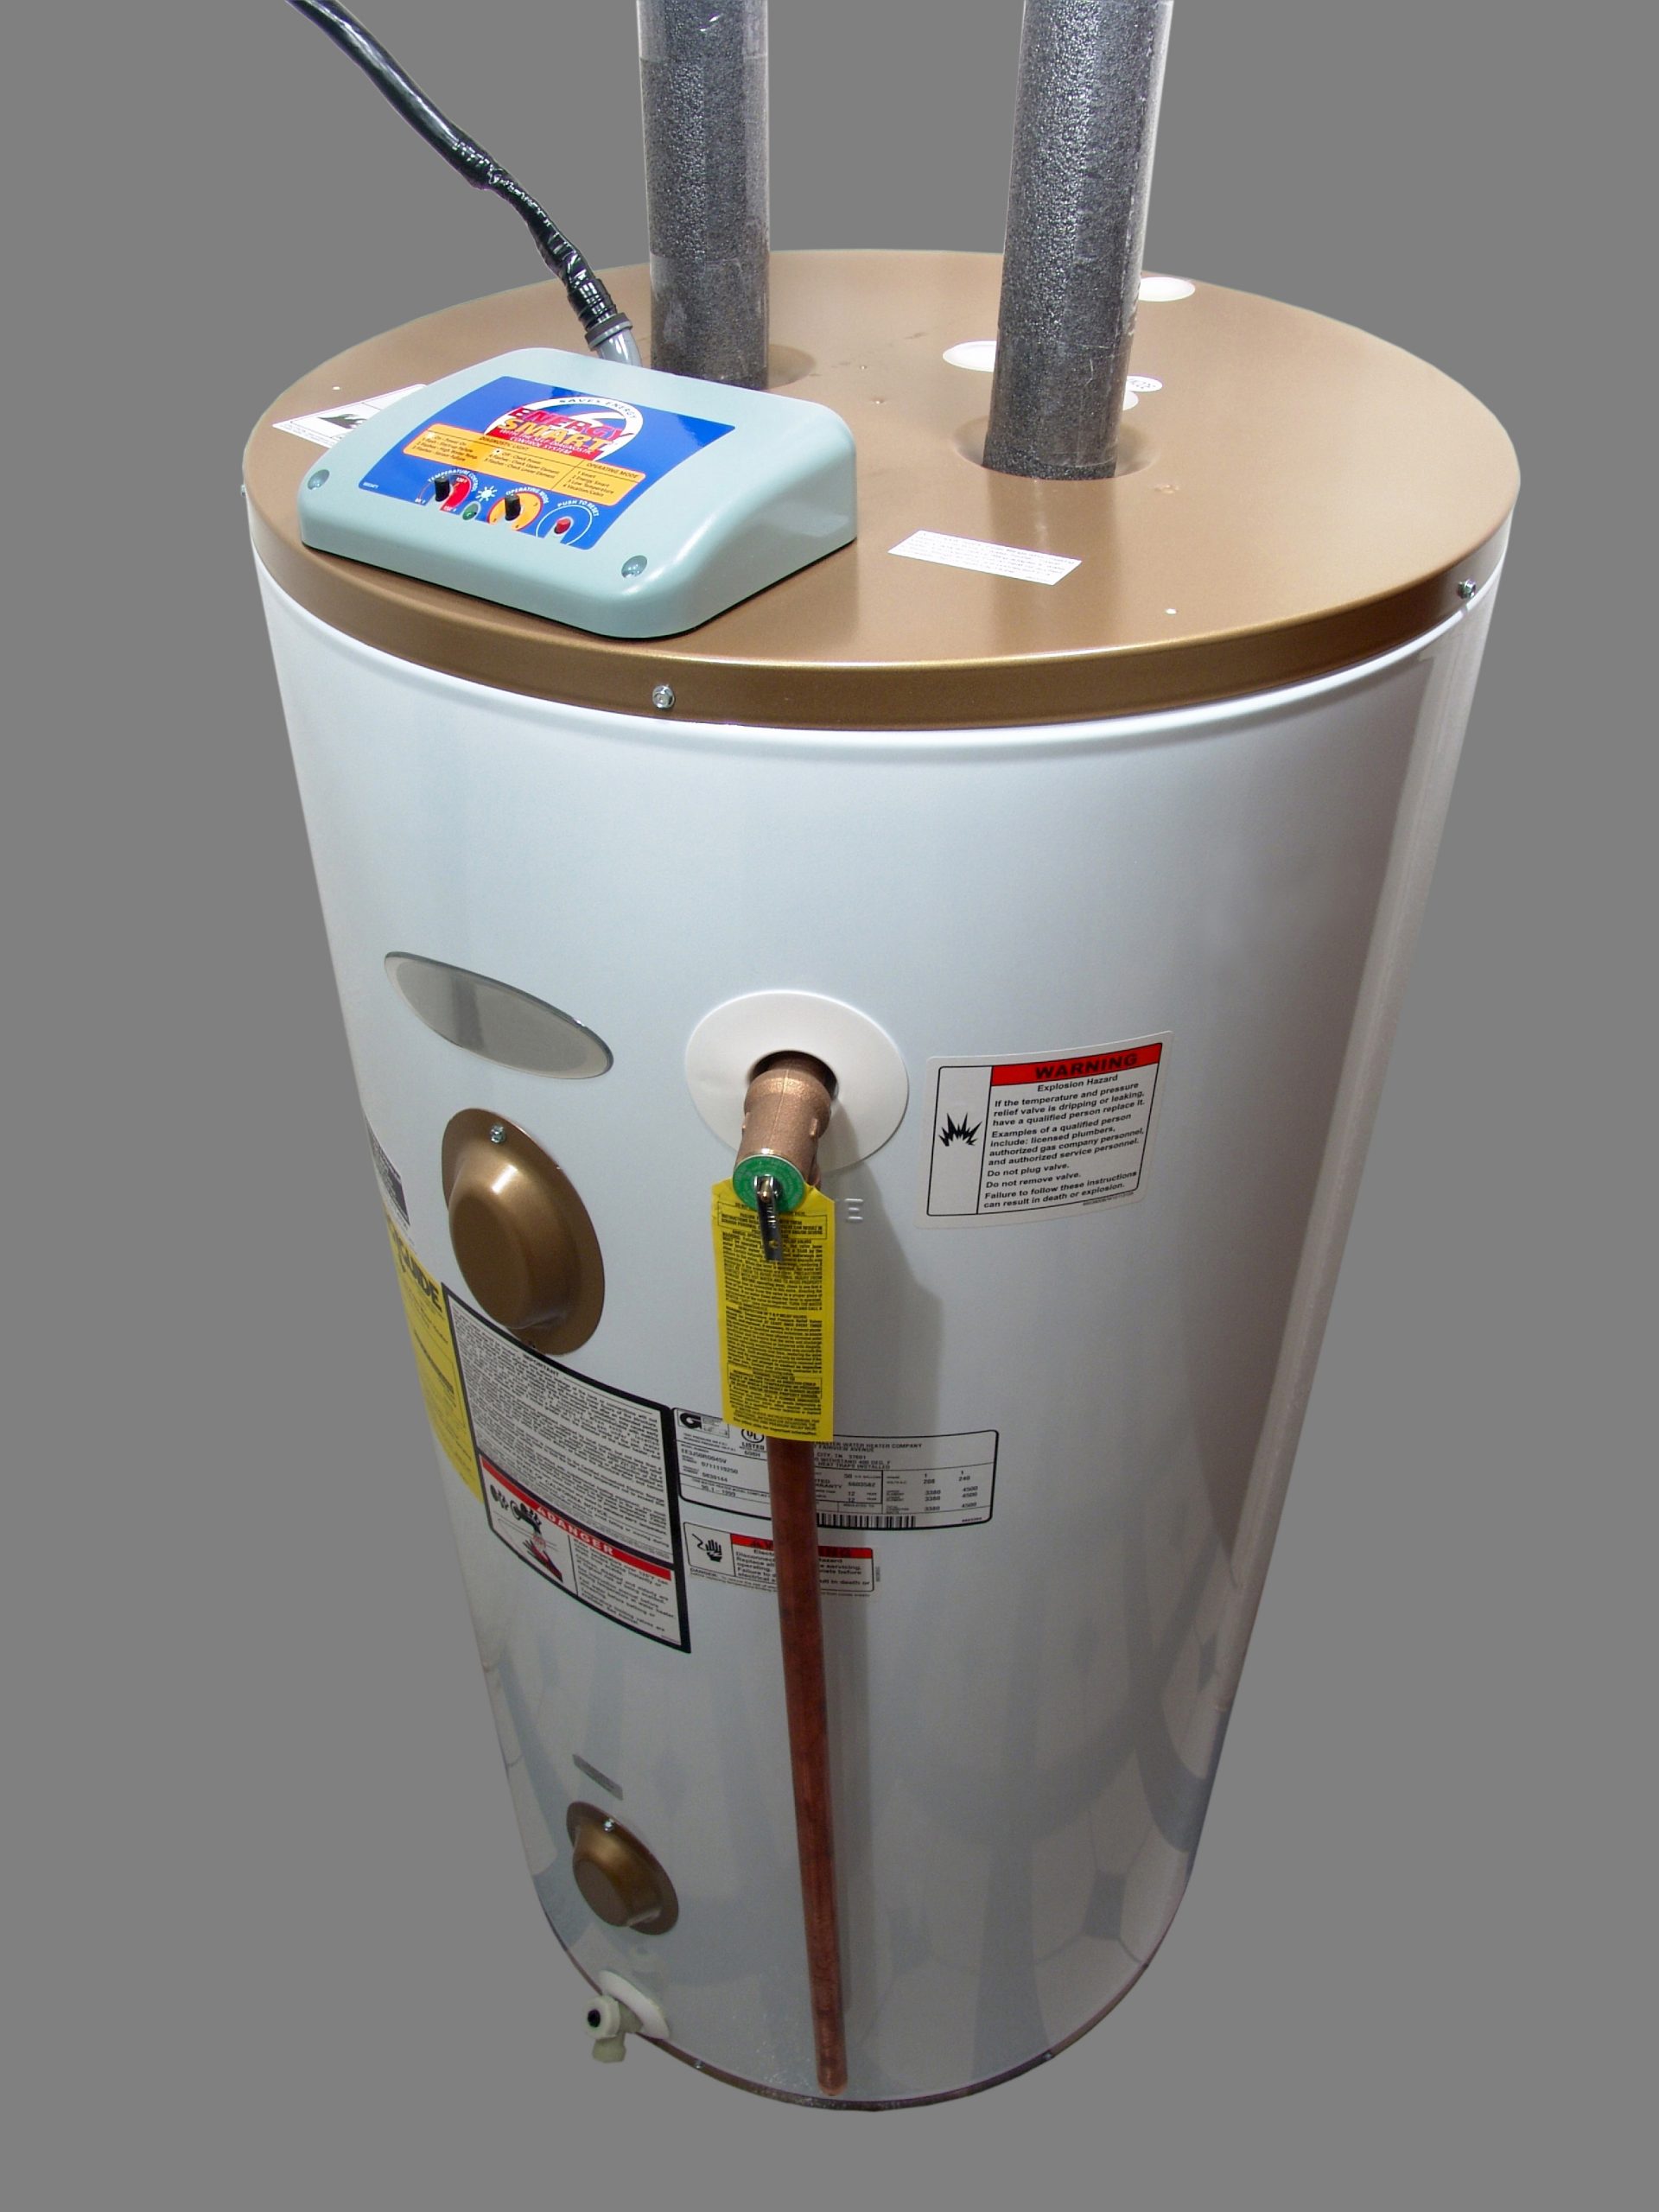 https://baylorinc.com/wp-content/uploads/2021/07/why-is-the-water-from-my-electric-water-heater-too-hot-scaled.jpg